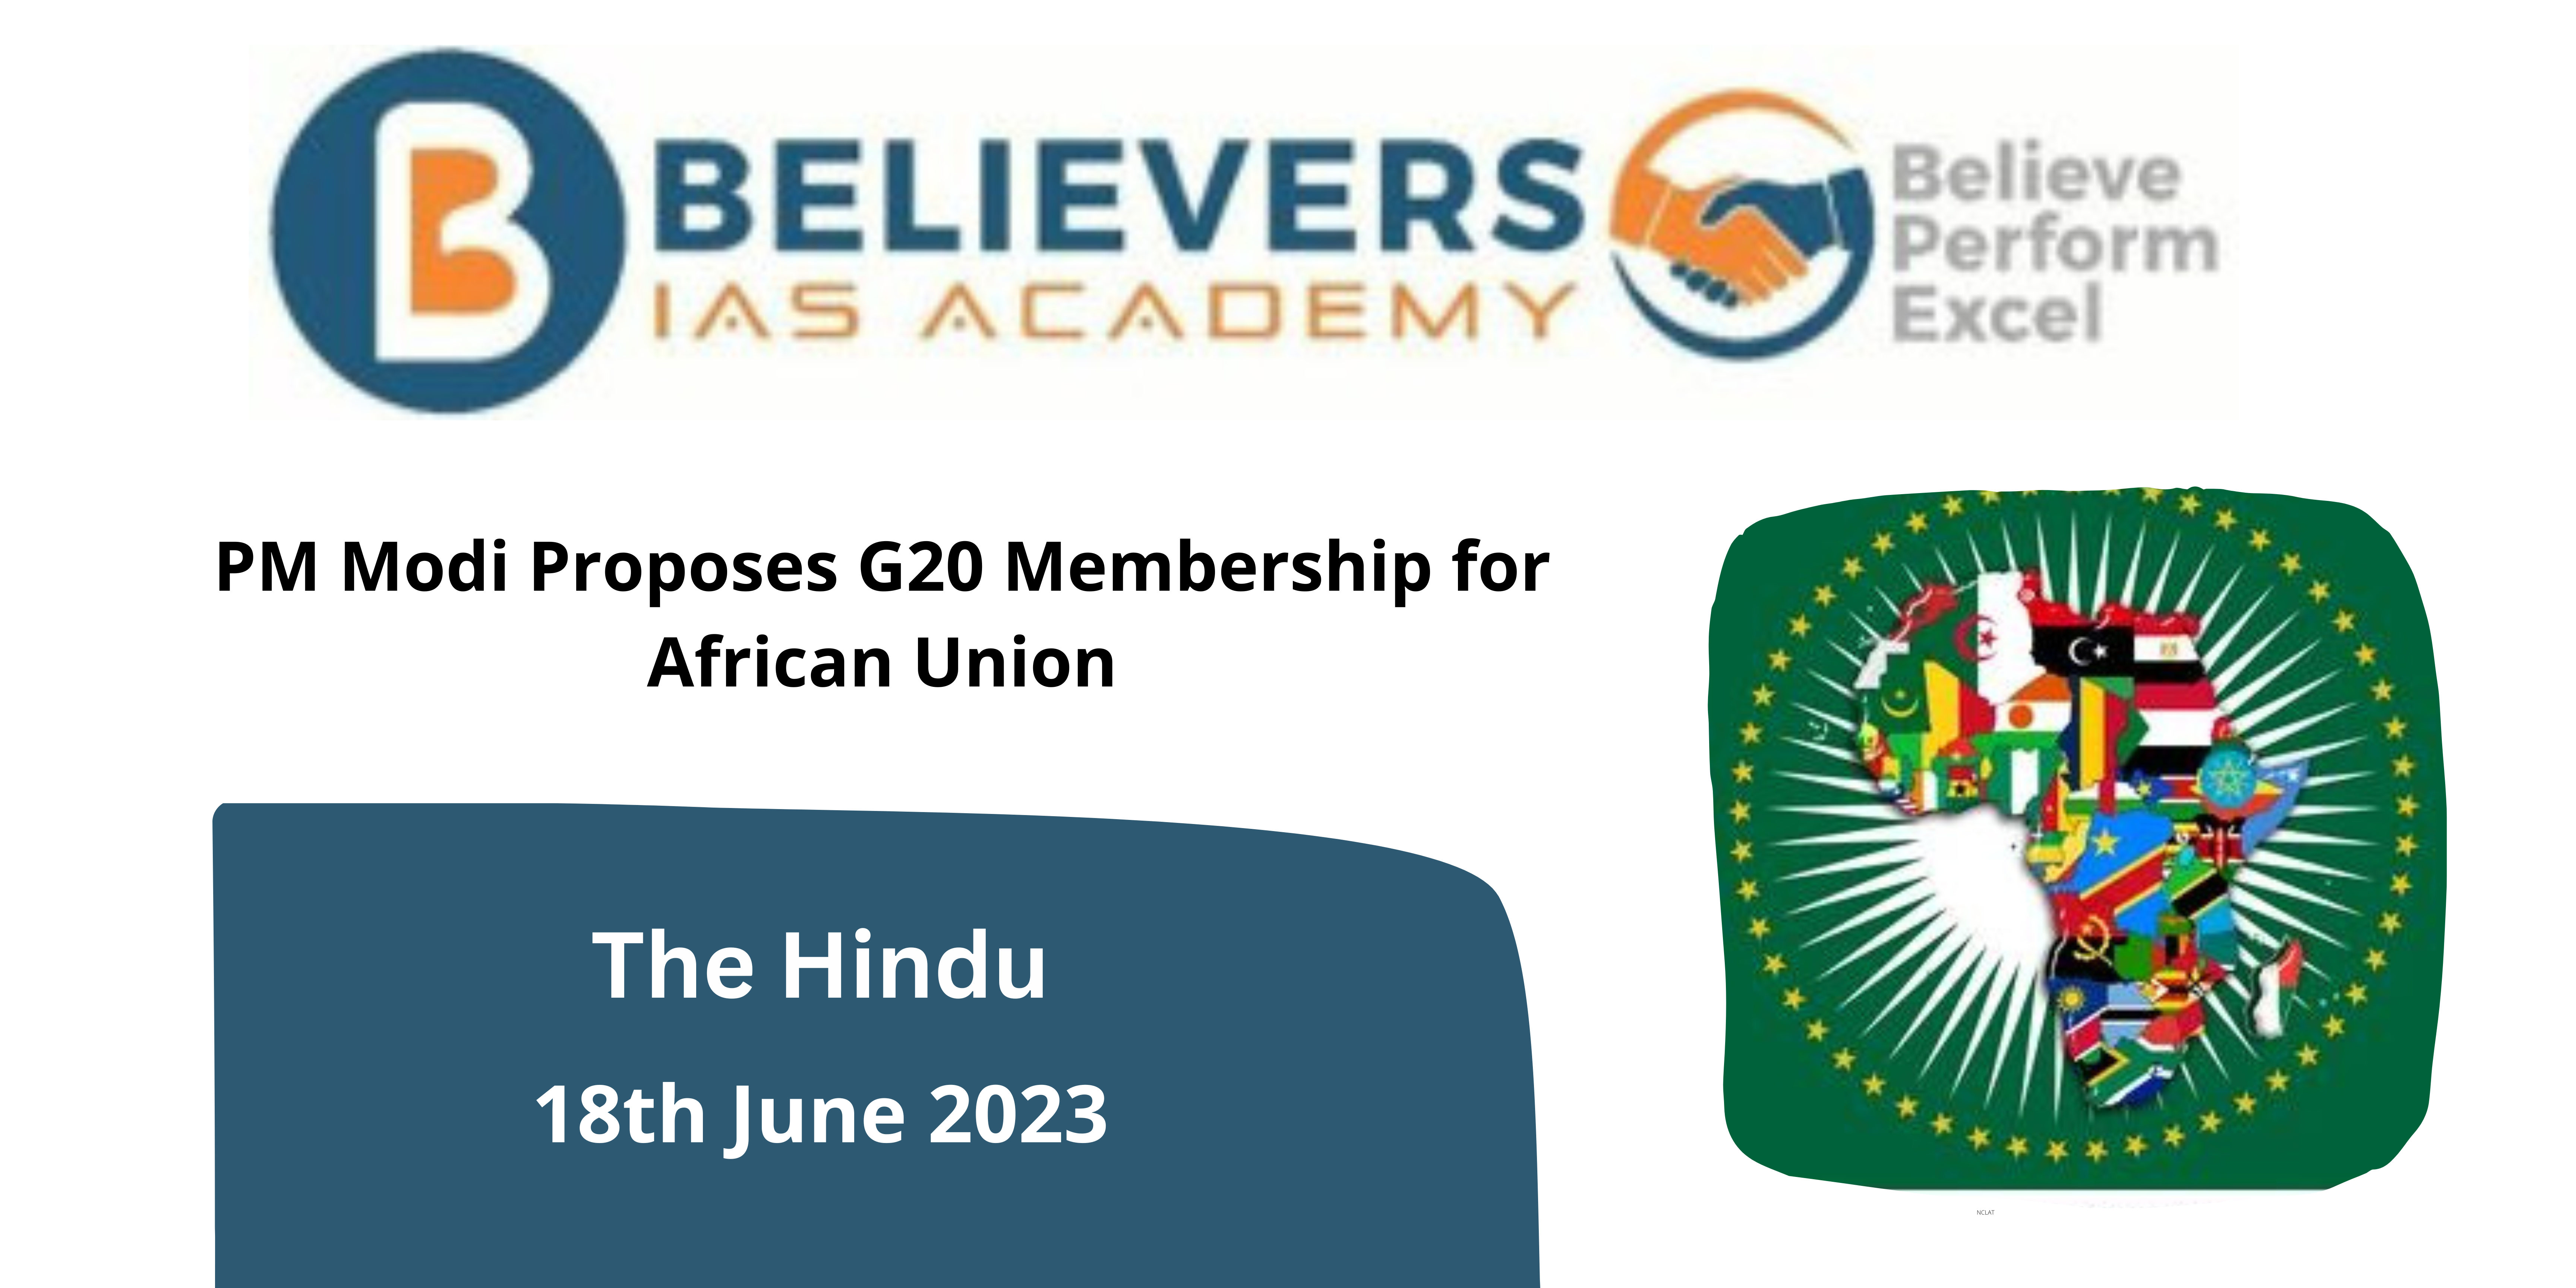 PM Modi Proposes G20 Membership for African Union